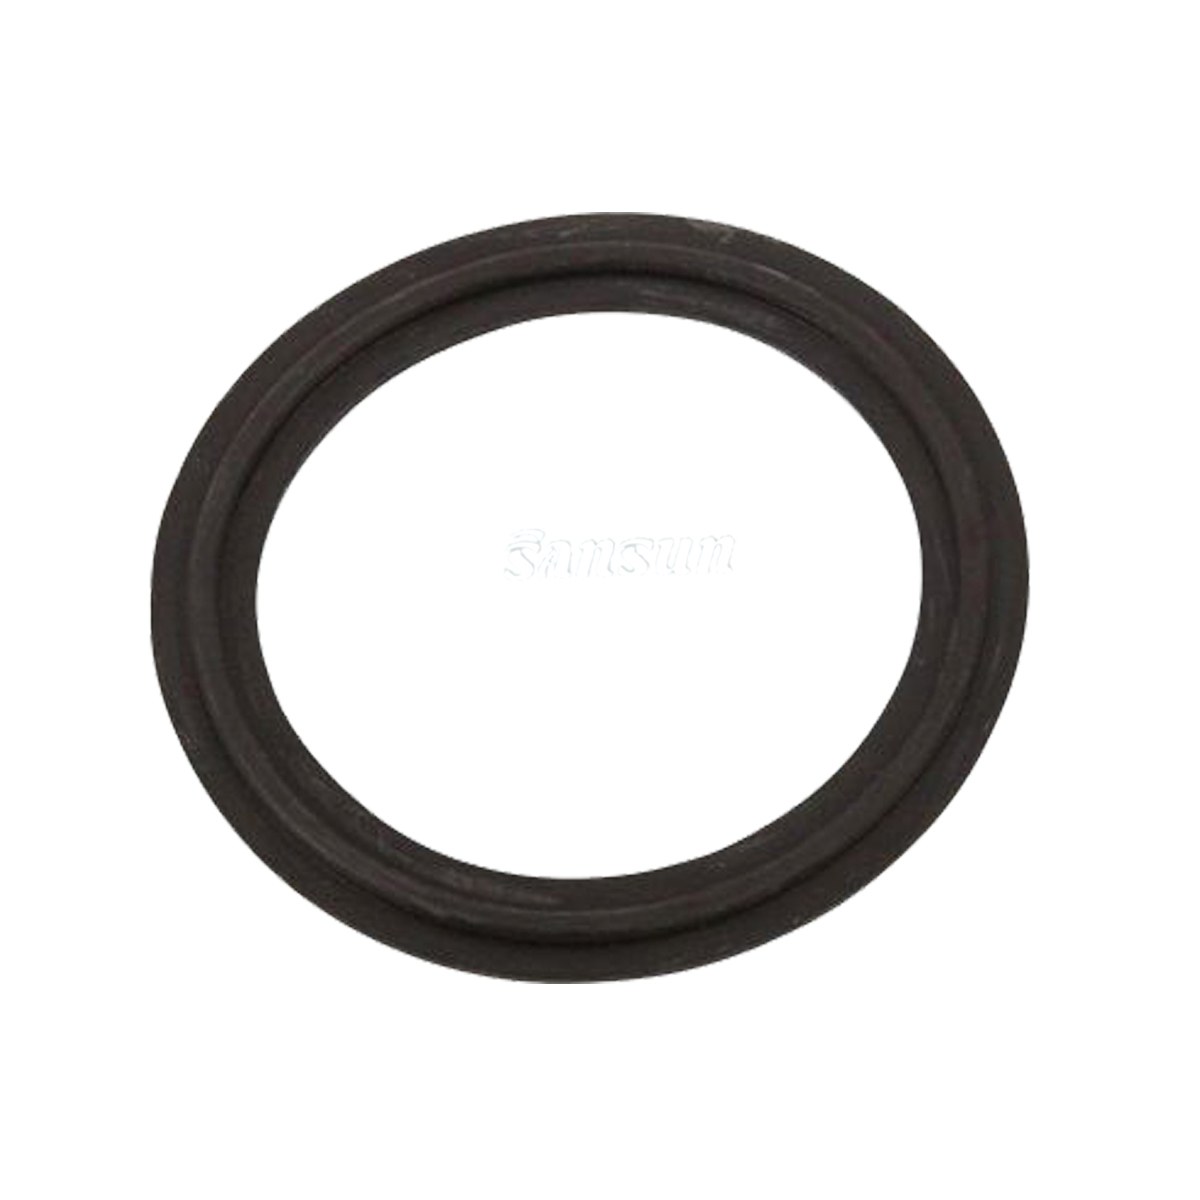 Food Grade SMS union Blue Silicone Rubber Gasket Seal 